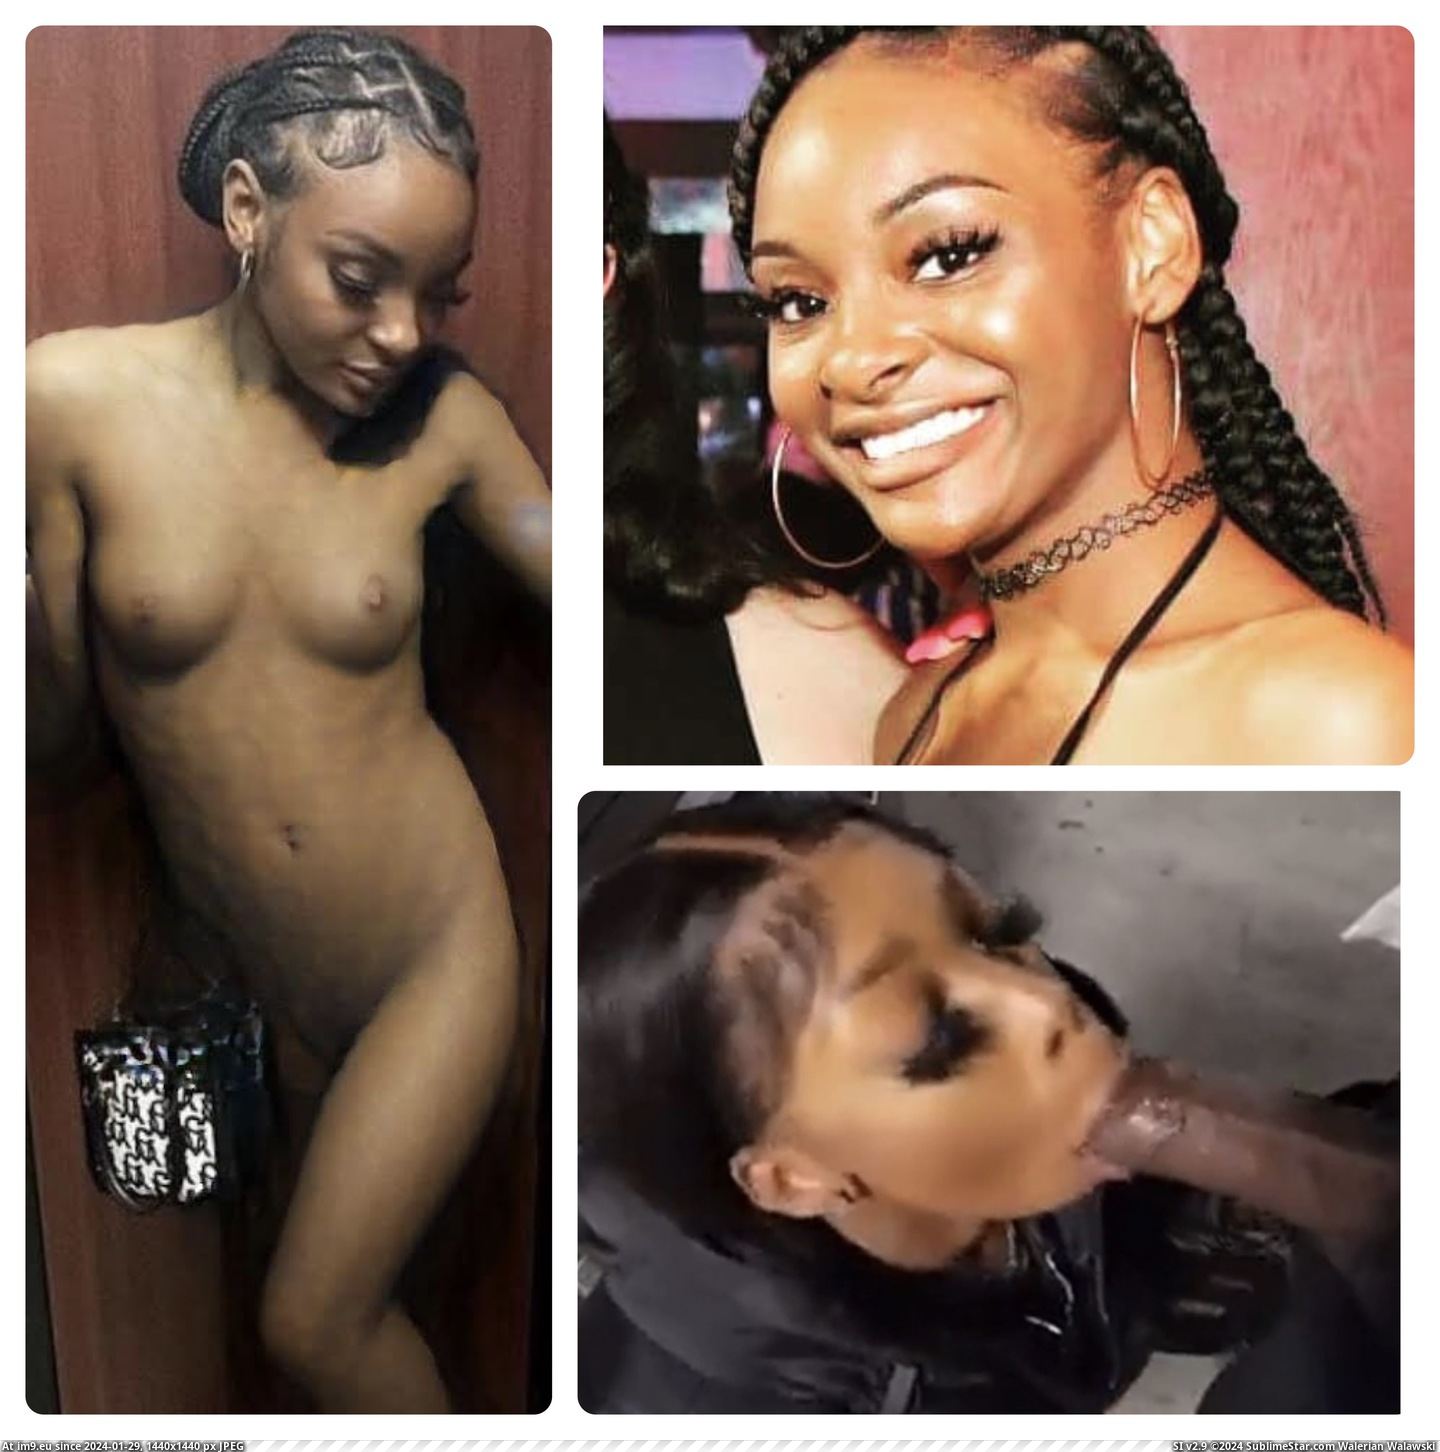 #Pussy #Ass #Cunt #Aaliyah #Webslut #Bdsm #Collages #Black #White #Ebony Aaliyah White Ebony Collages - 044 Pic. (Image of album Aaliyah White Exposed Webslut))